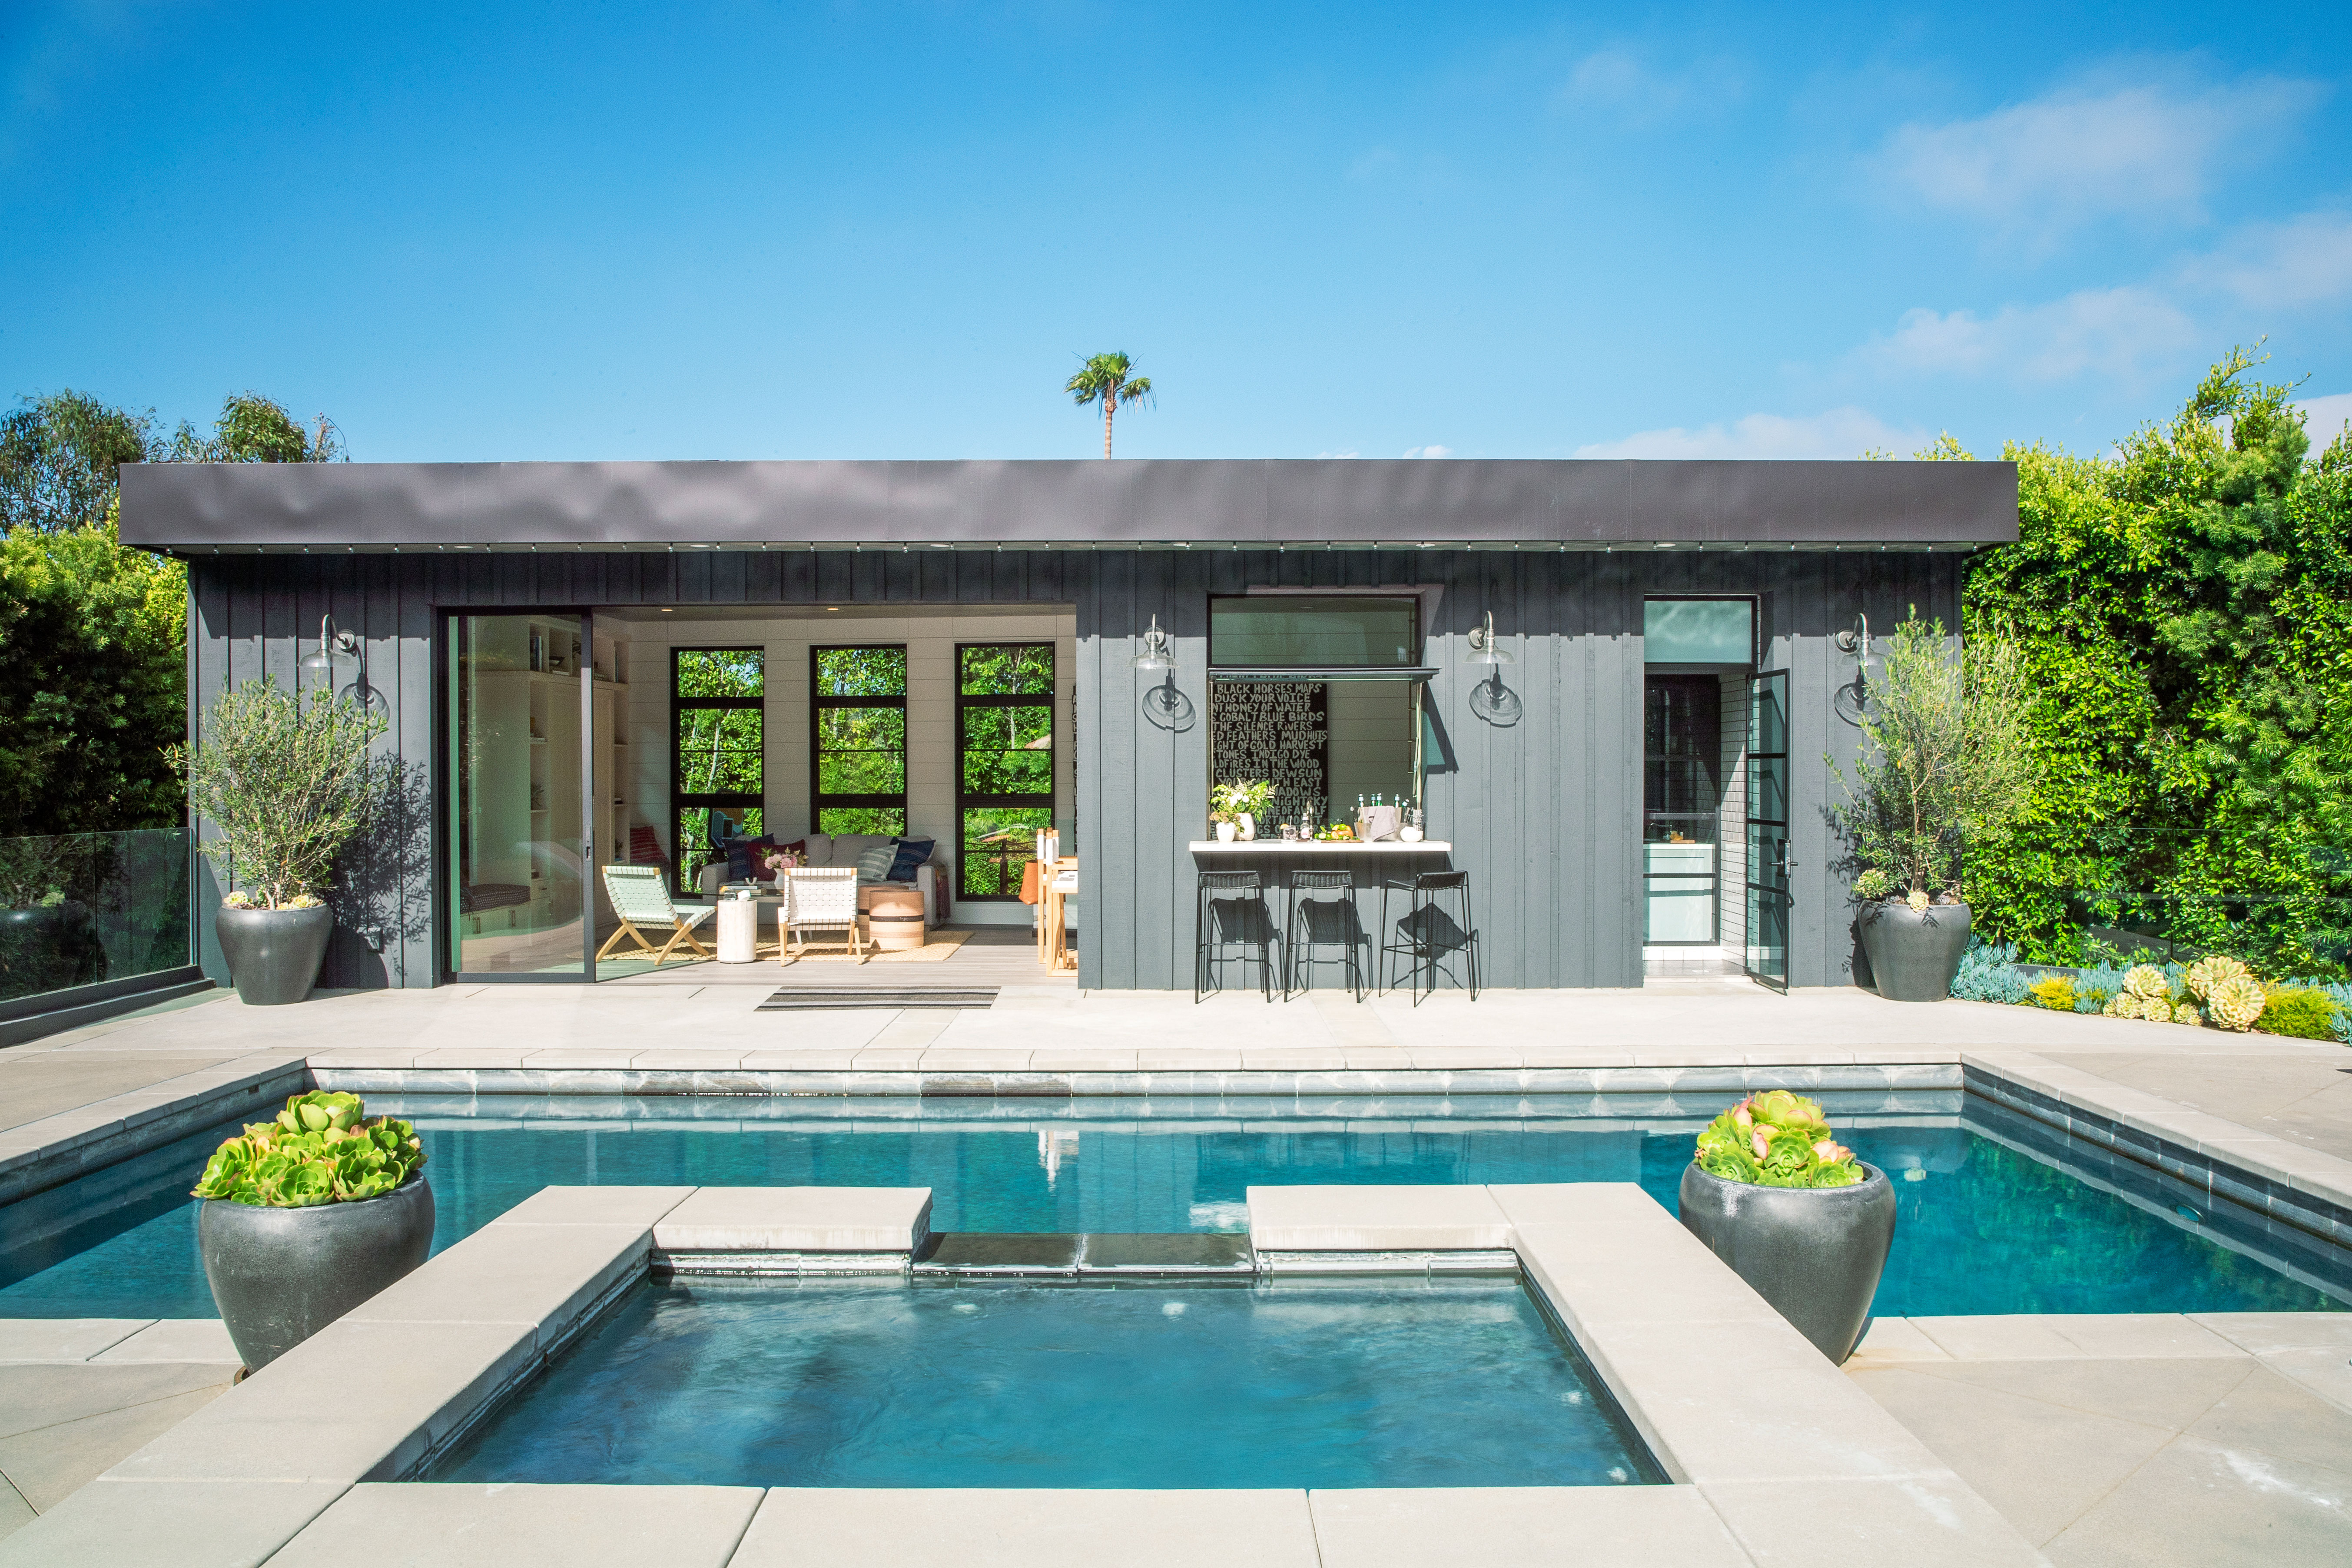 How to Design  a Show Stopping Pool  House  Sunset Magazine